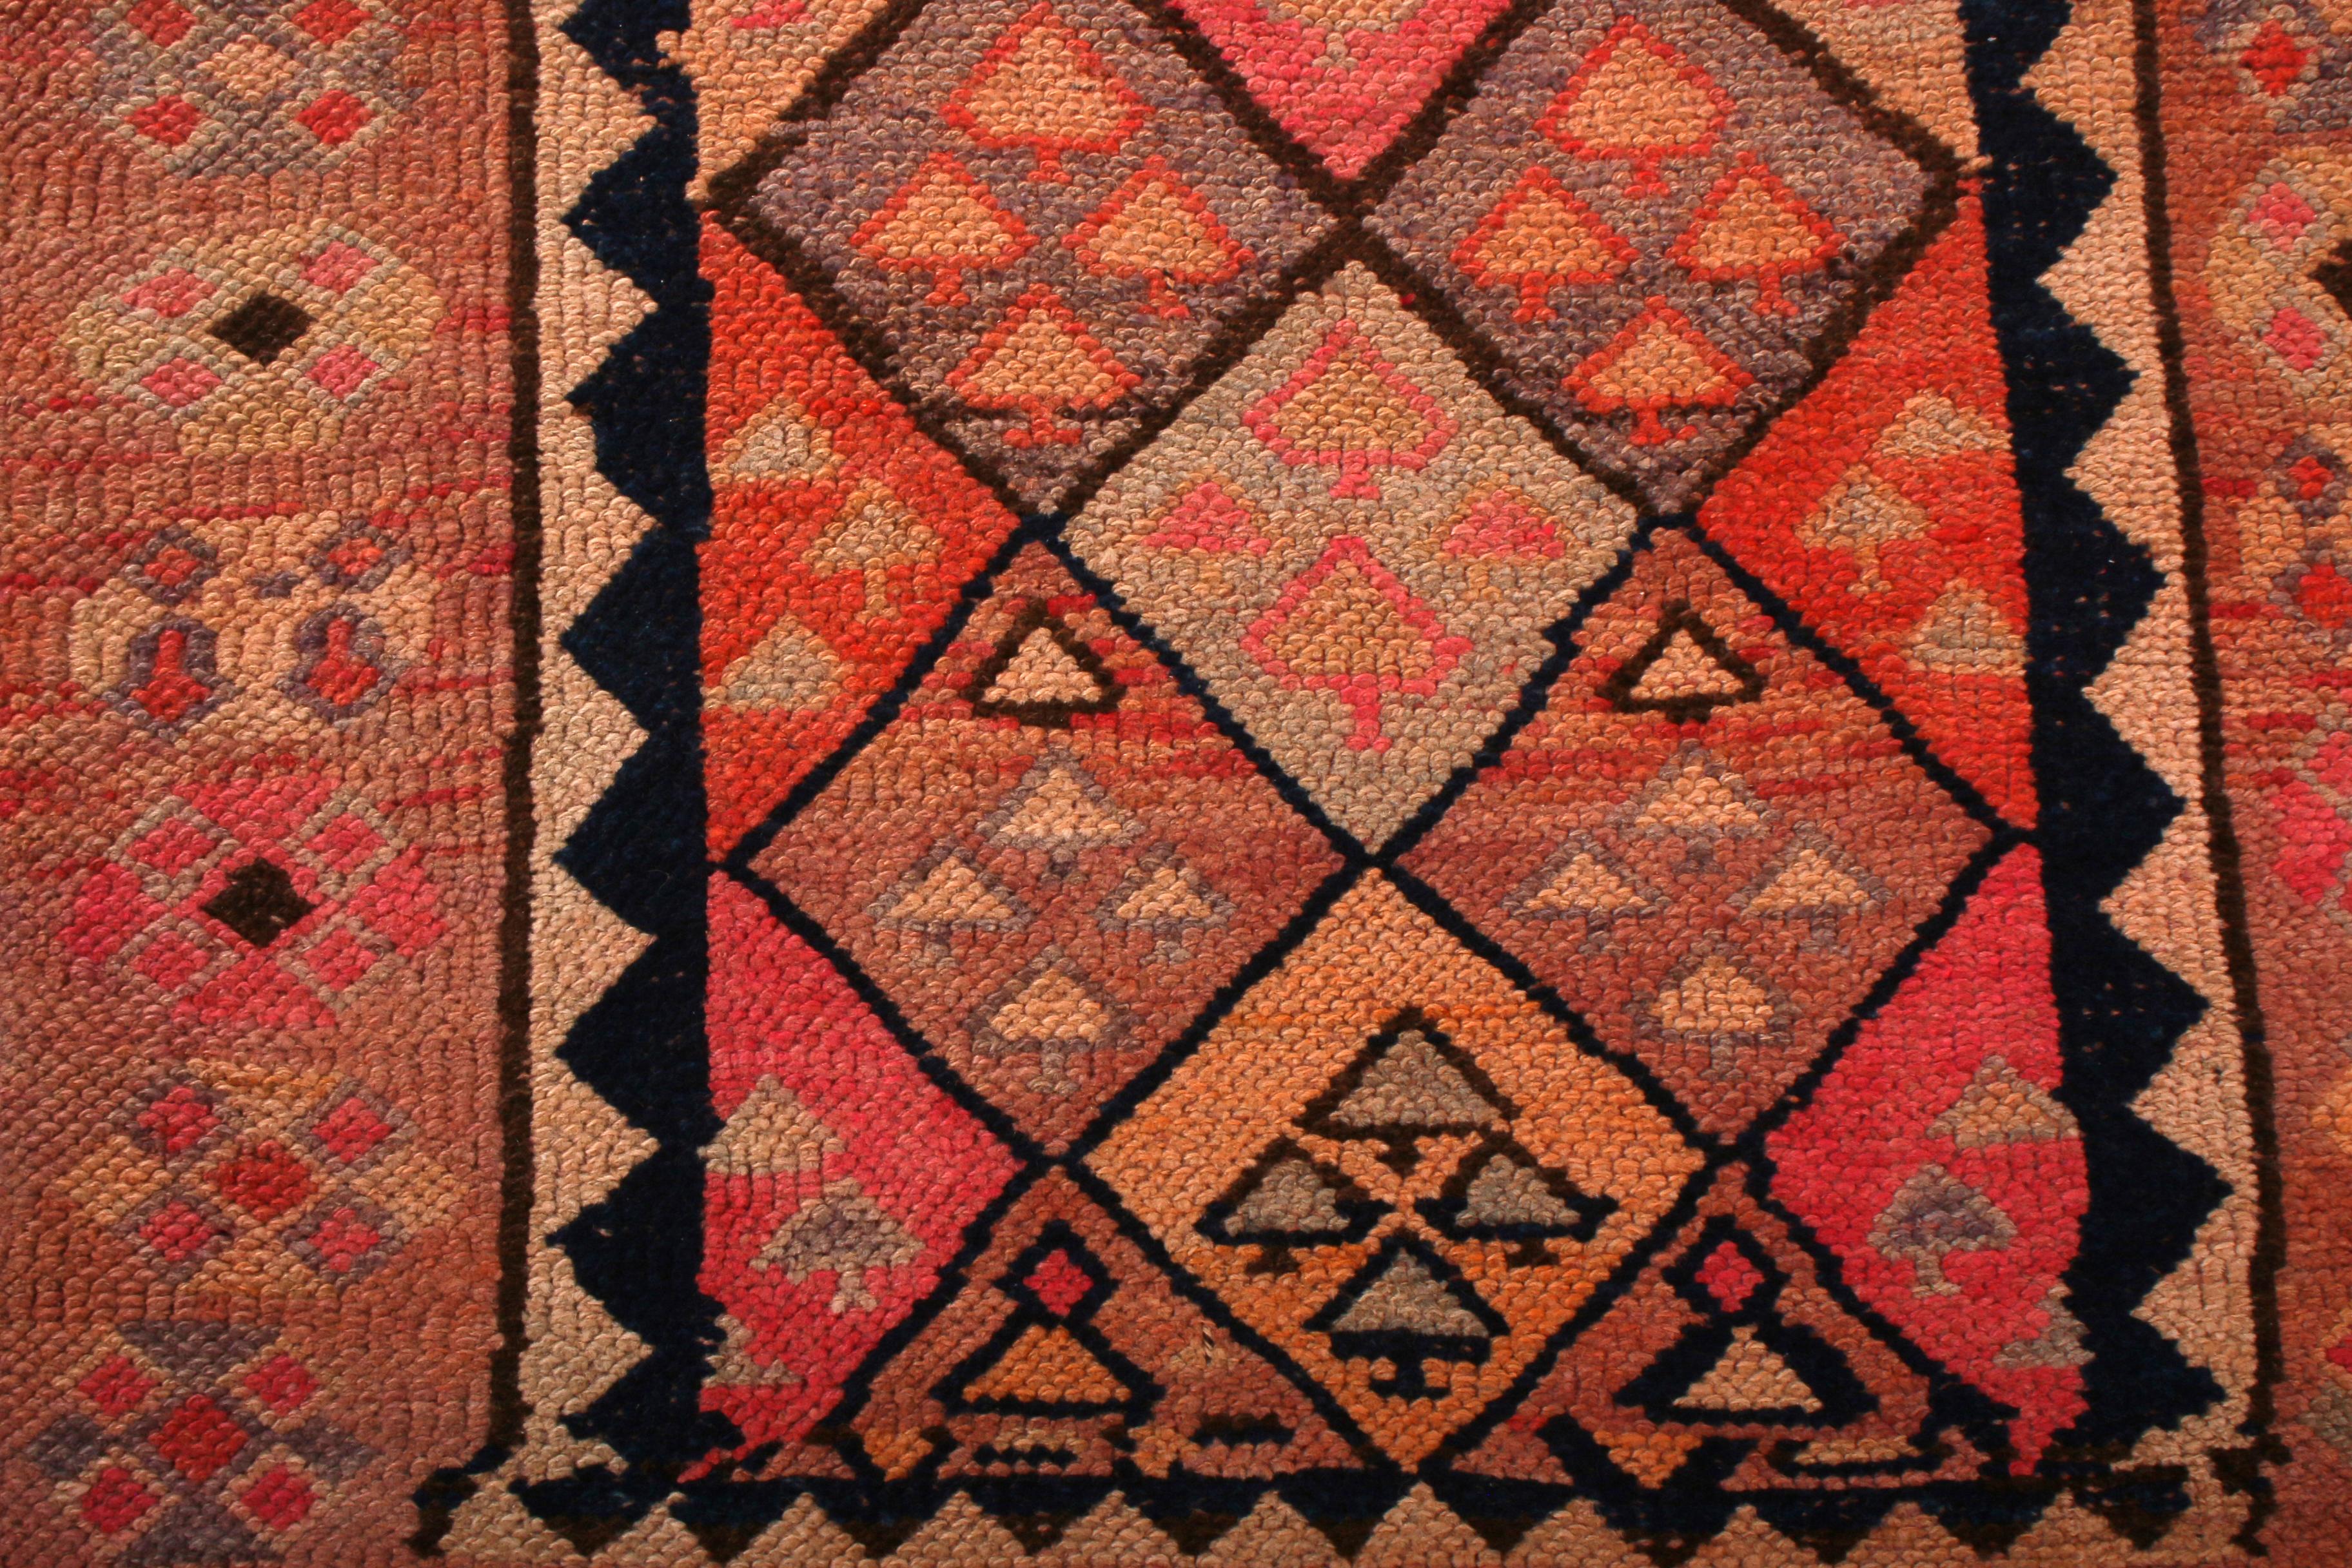 Vintage Midcentury Kilim Geometric Pink and Beige Wool Runner by Rug & Kilim In Good Condition For Sale In Long Island City, NY